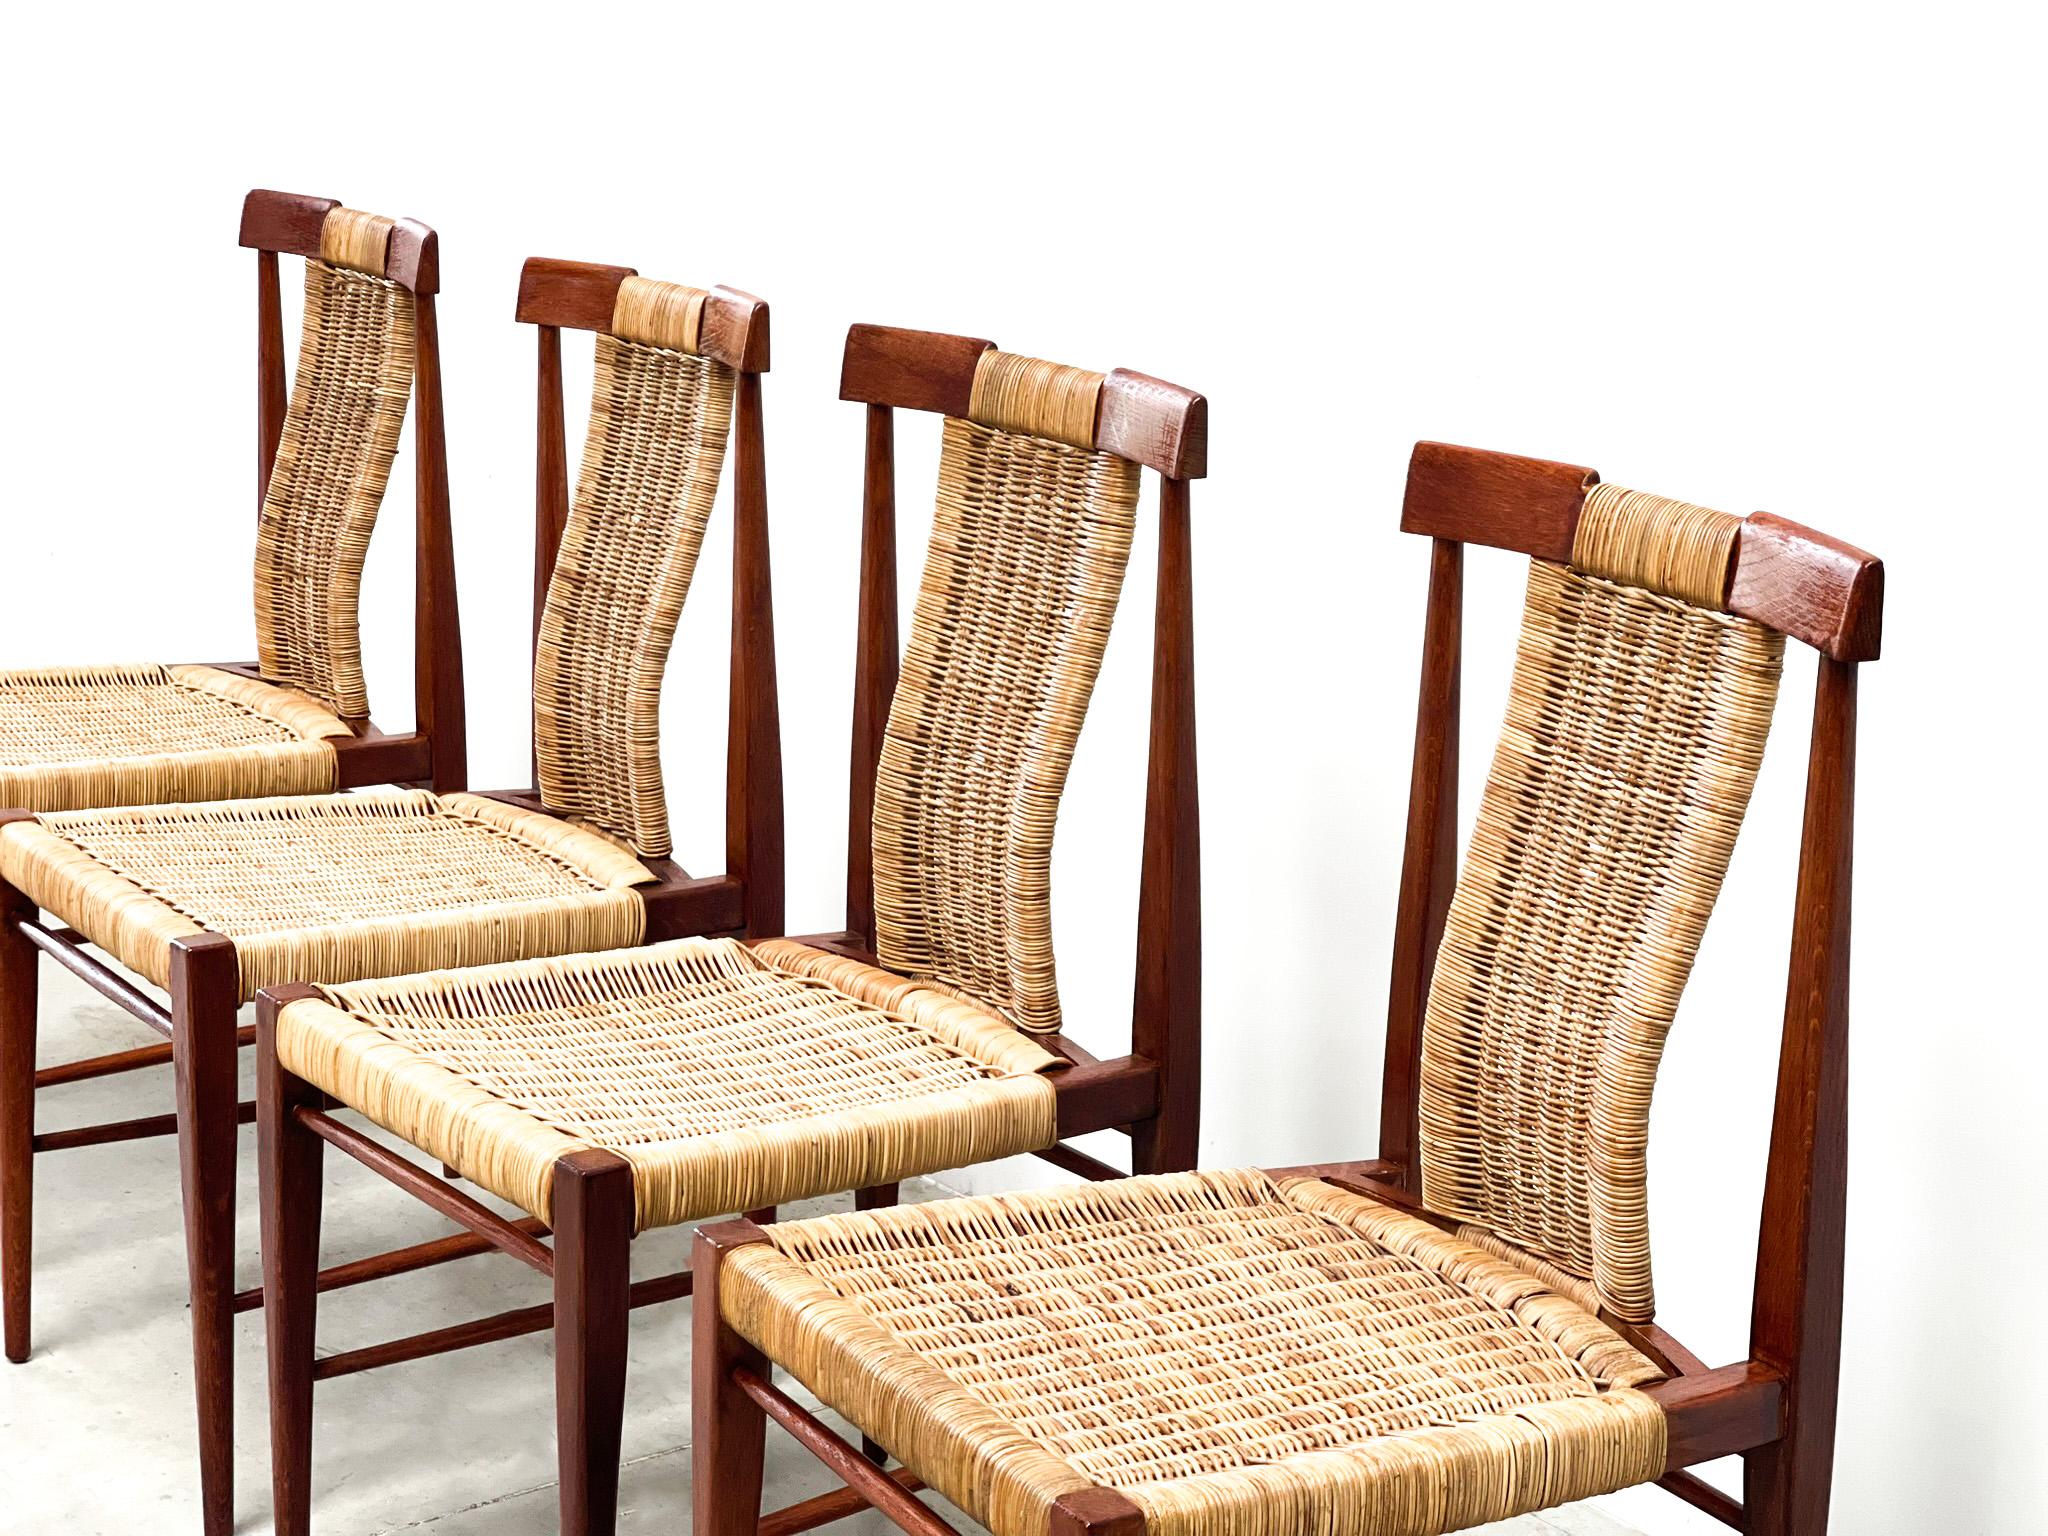 Elegant mid century italian dining chairs made from teak and wicker.

Beautifully designed teak frames.

The chairs are in very good condition.

1960s - Italy

Dimensions:
Height: 87cm/34.25